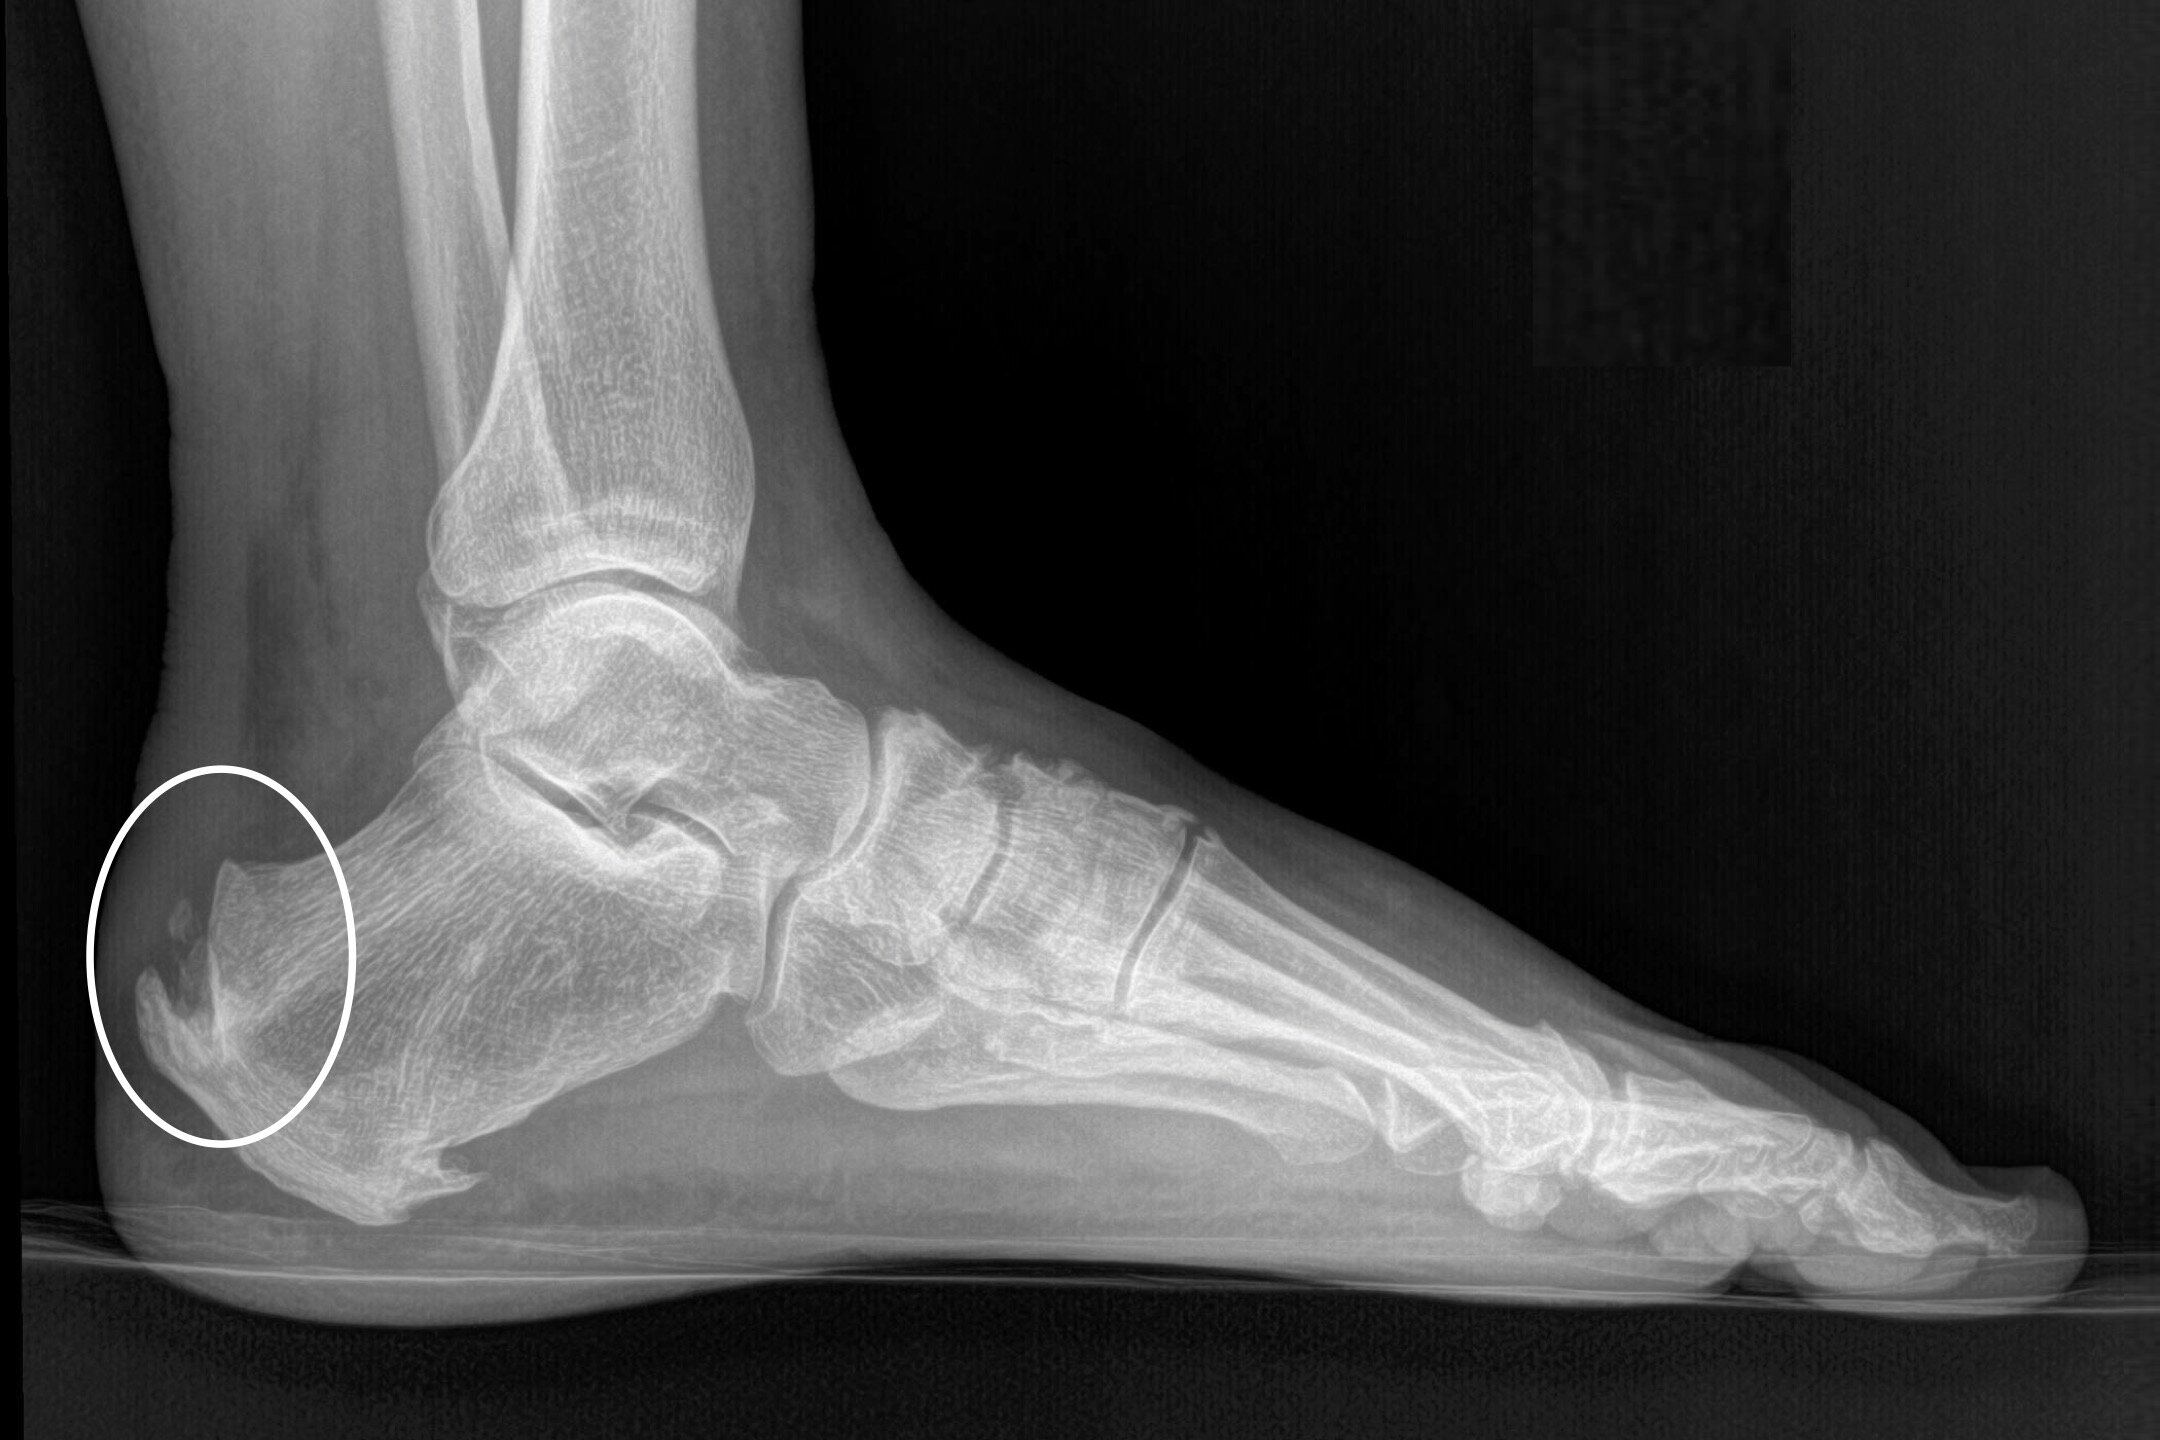 Heel spur: Symptoms, causes, diagnosis and treatments